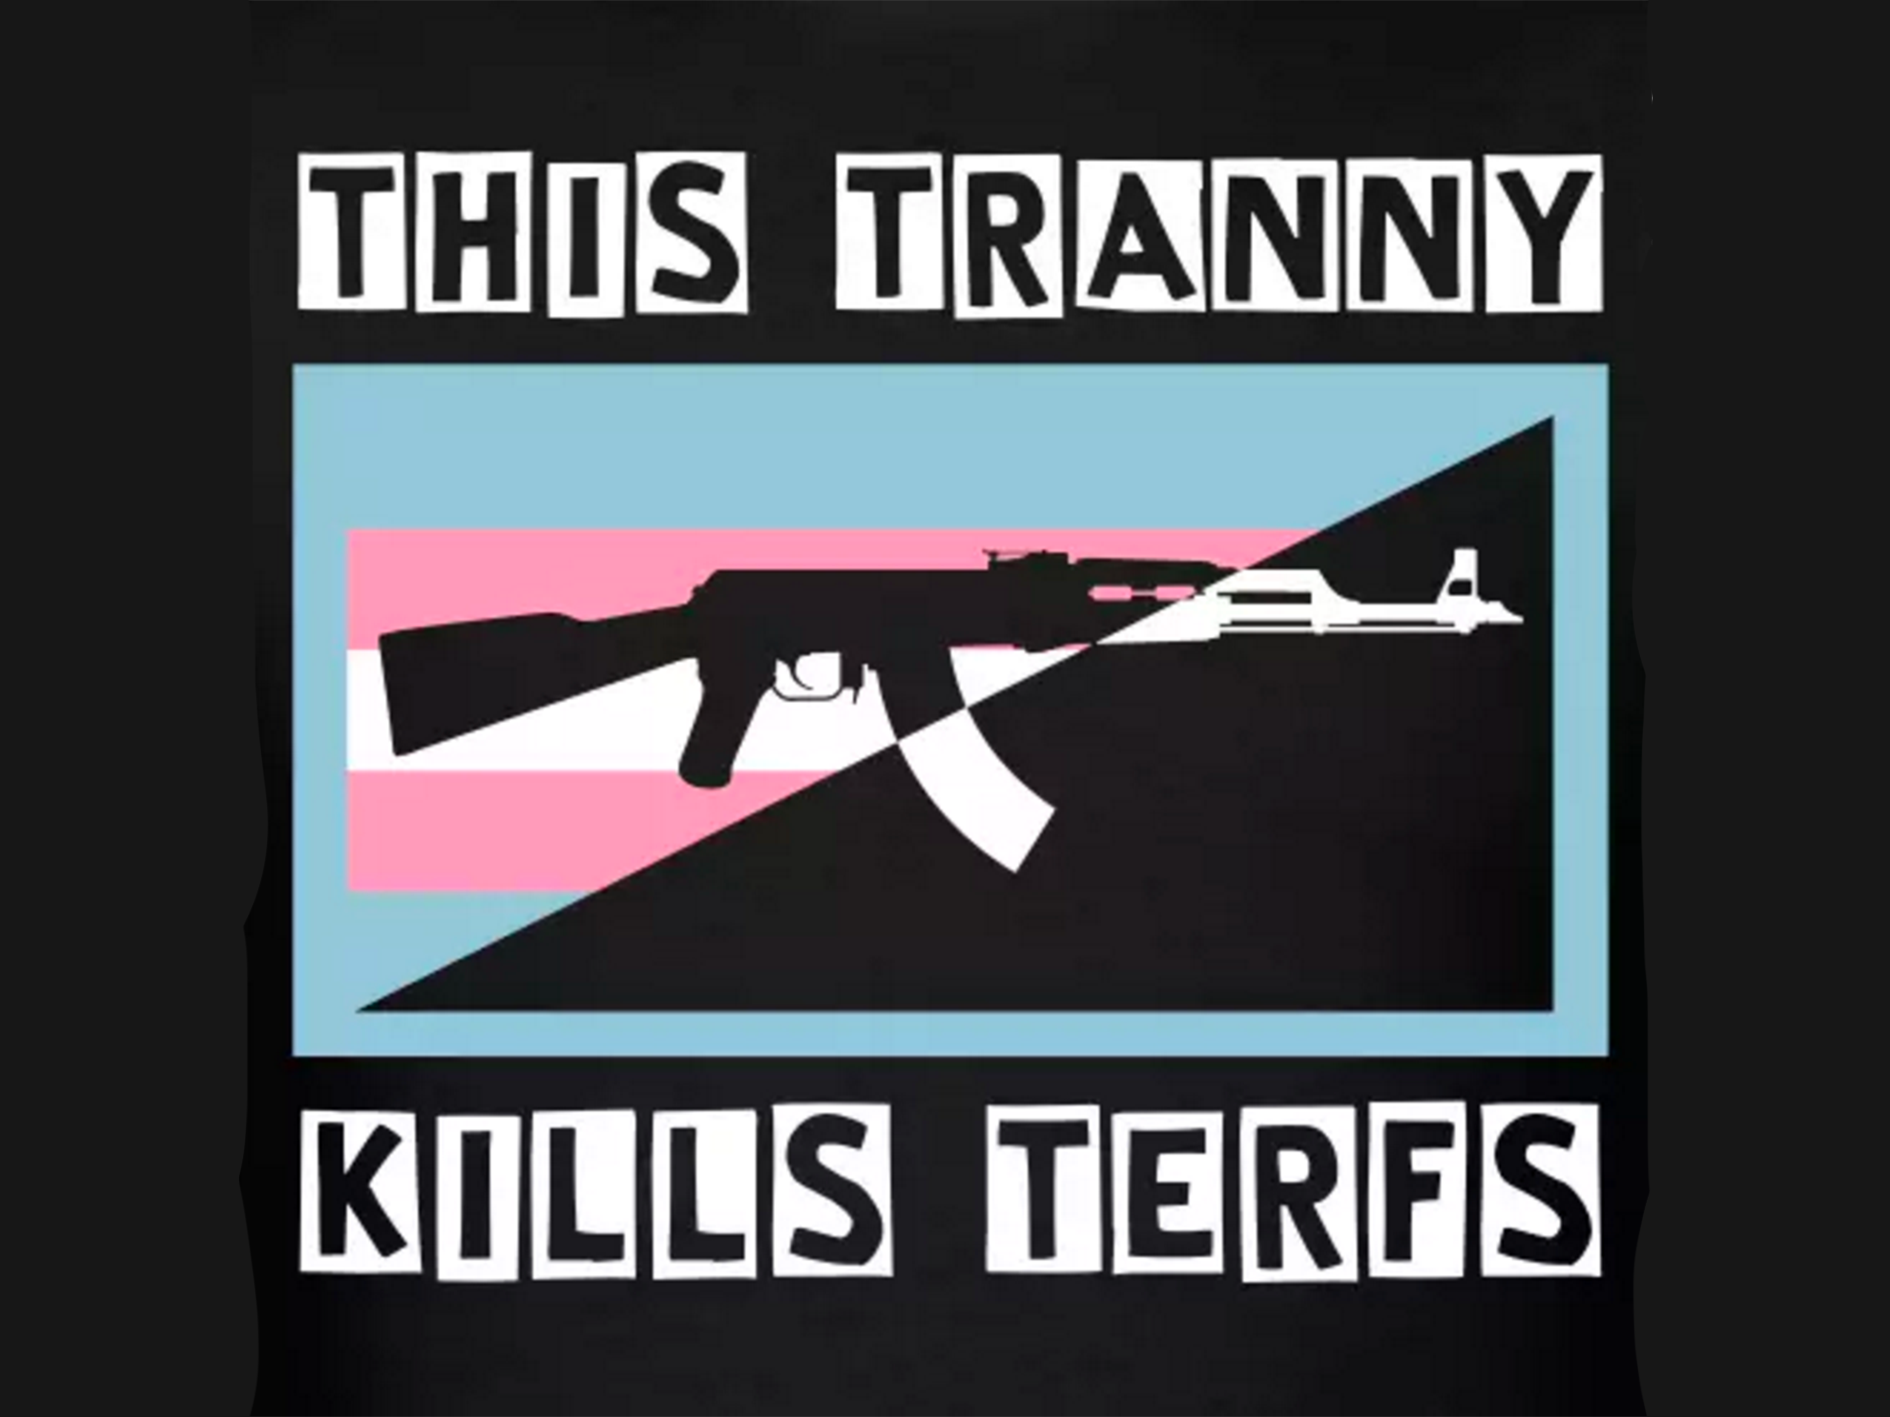 What is a "TERF"?